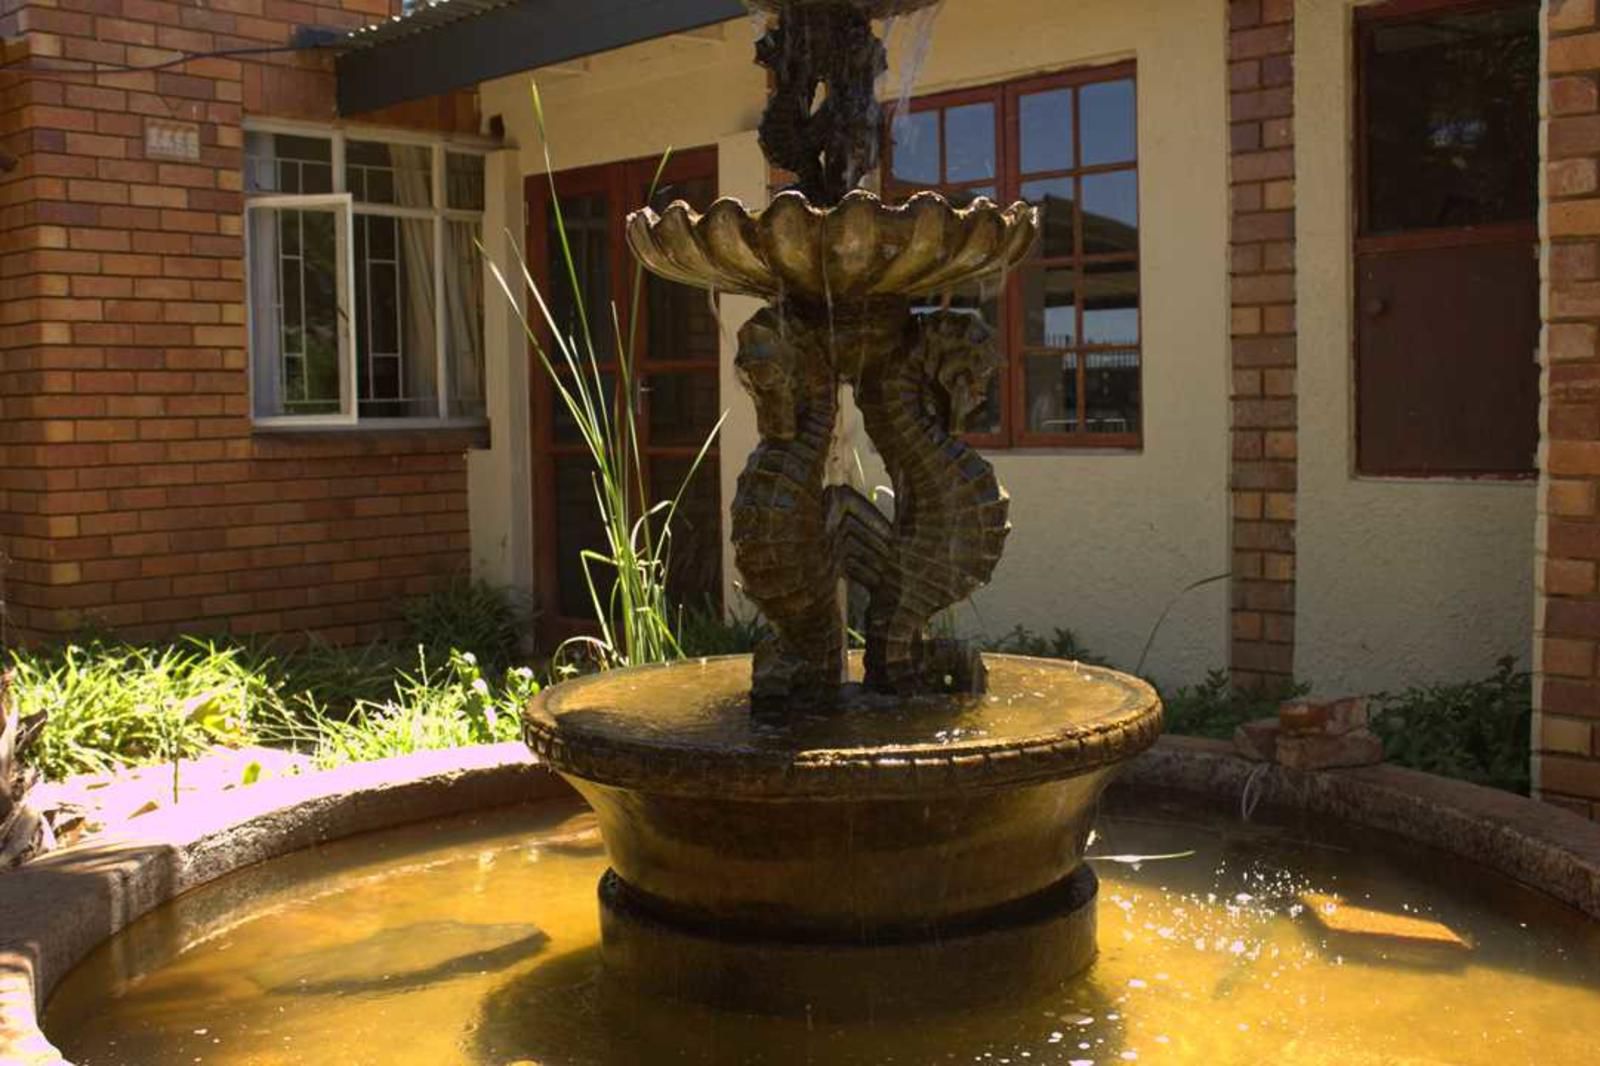 Immanuel Guest House Warrenton Northern Cape South Africa Fountain, Architecture